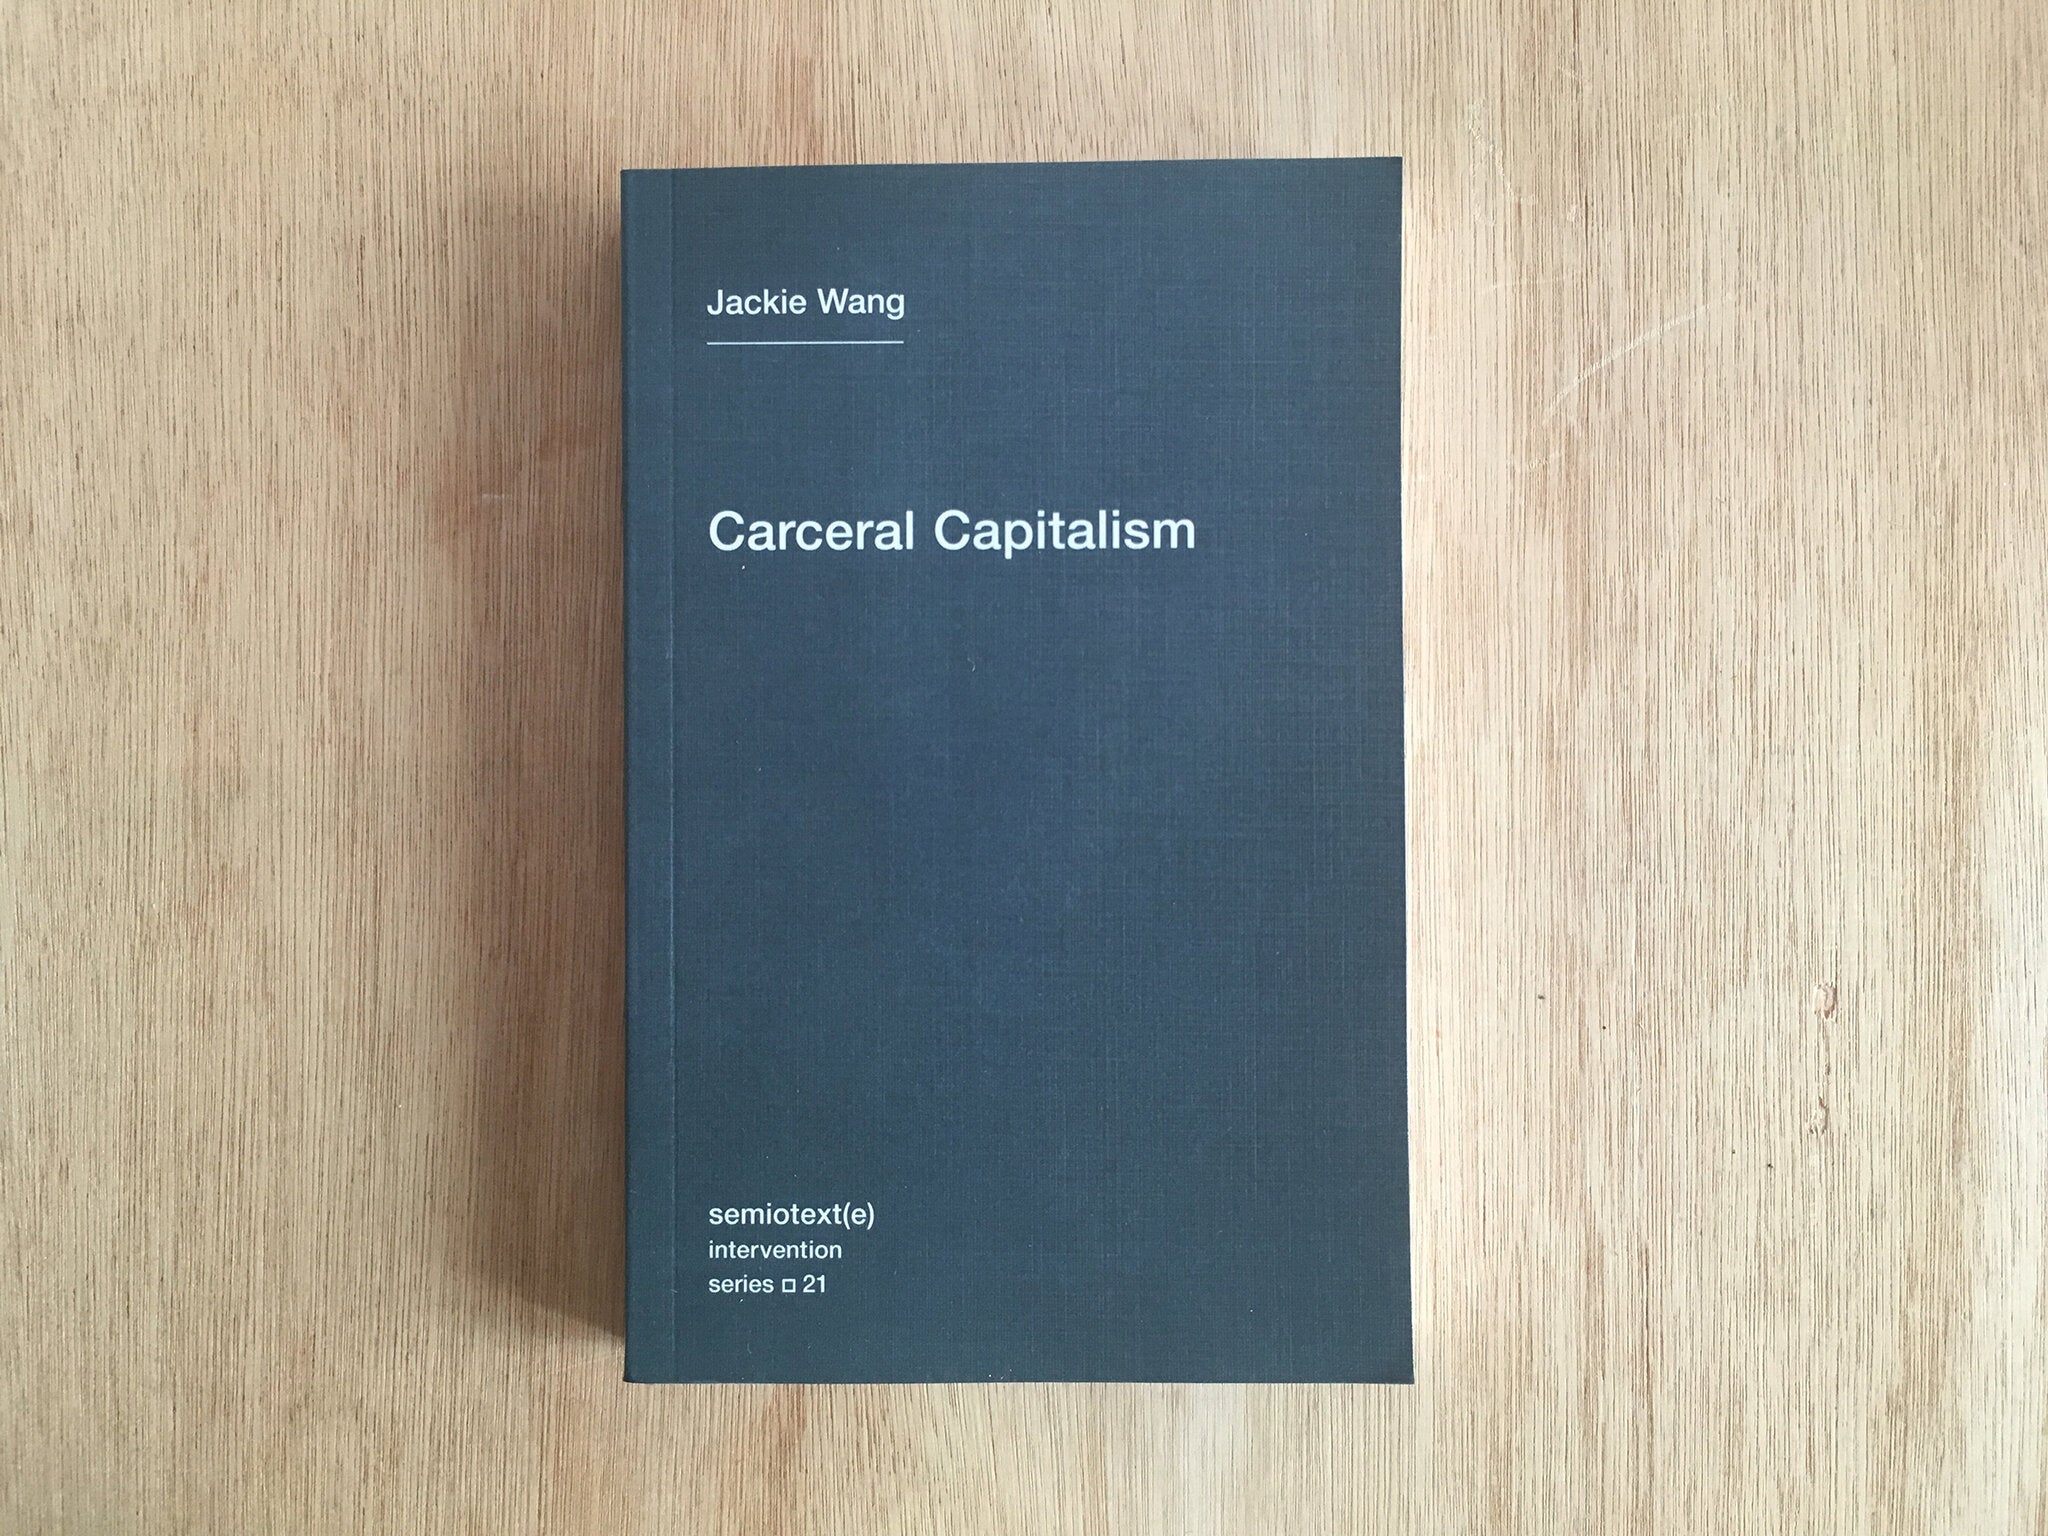 CARCERAL CAPITALISM by Jackie Wang